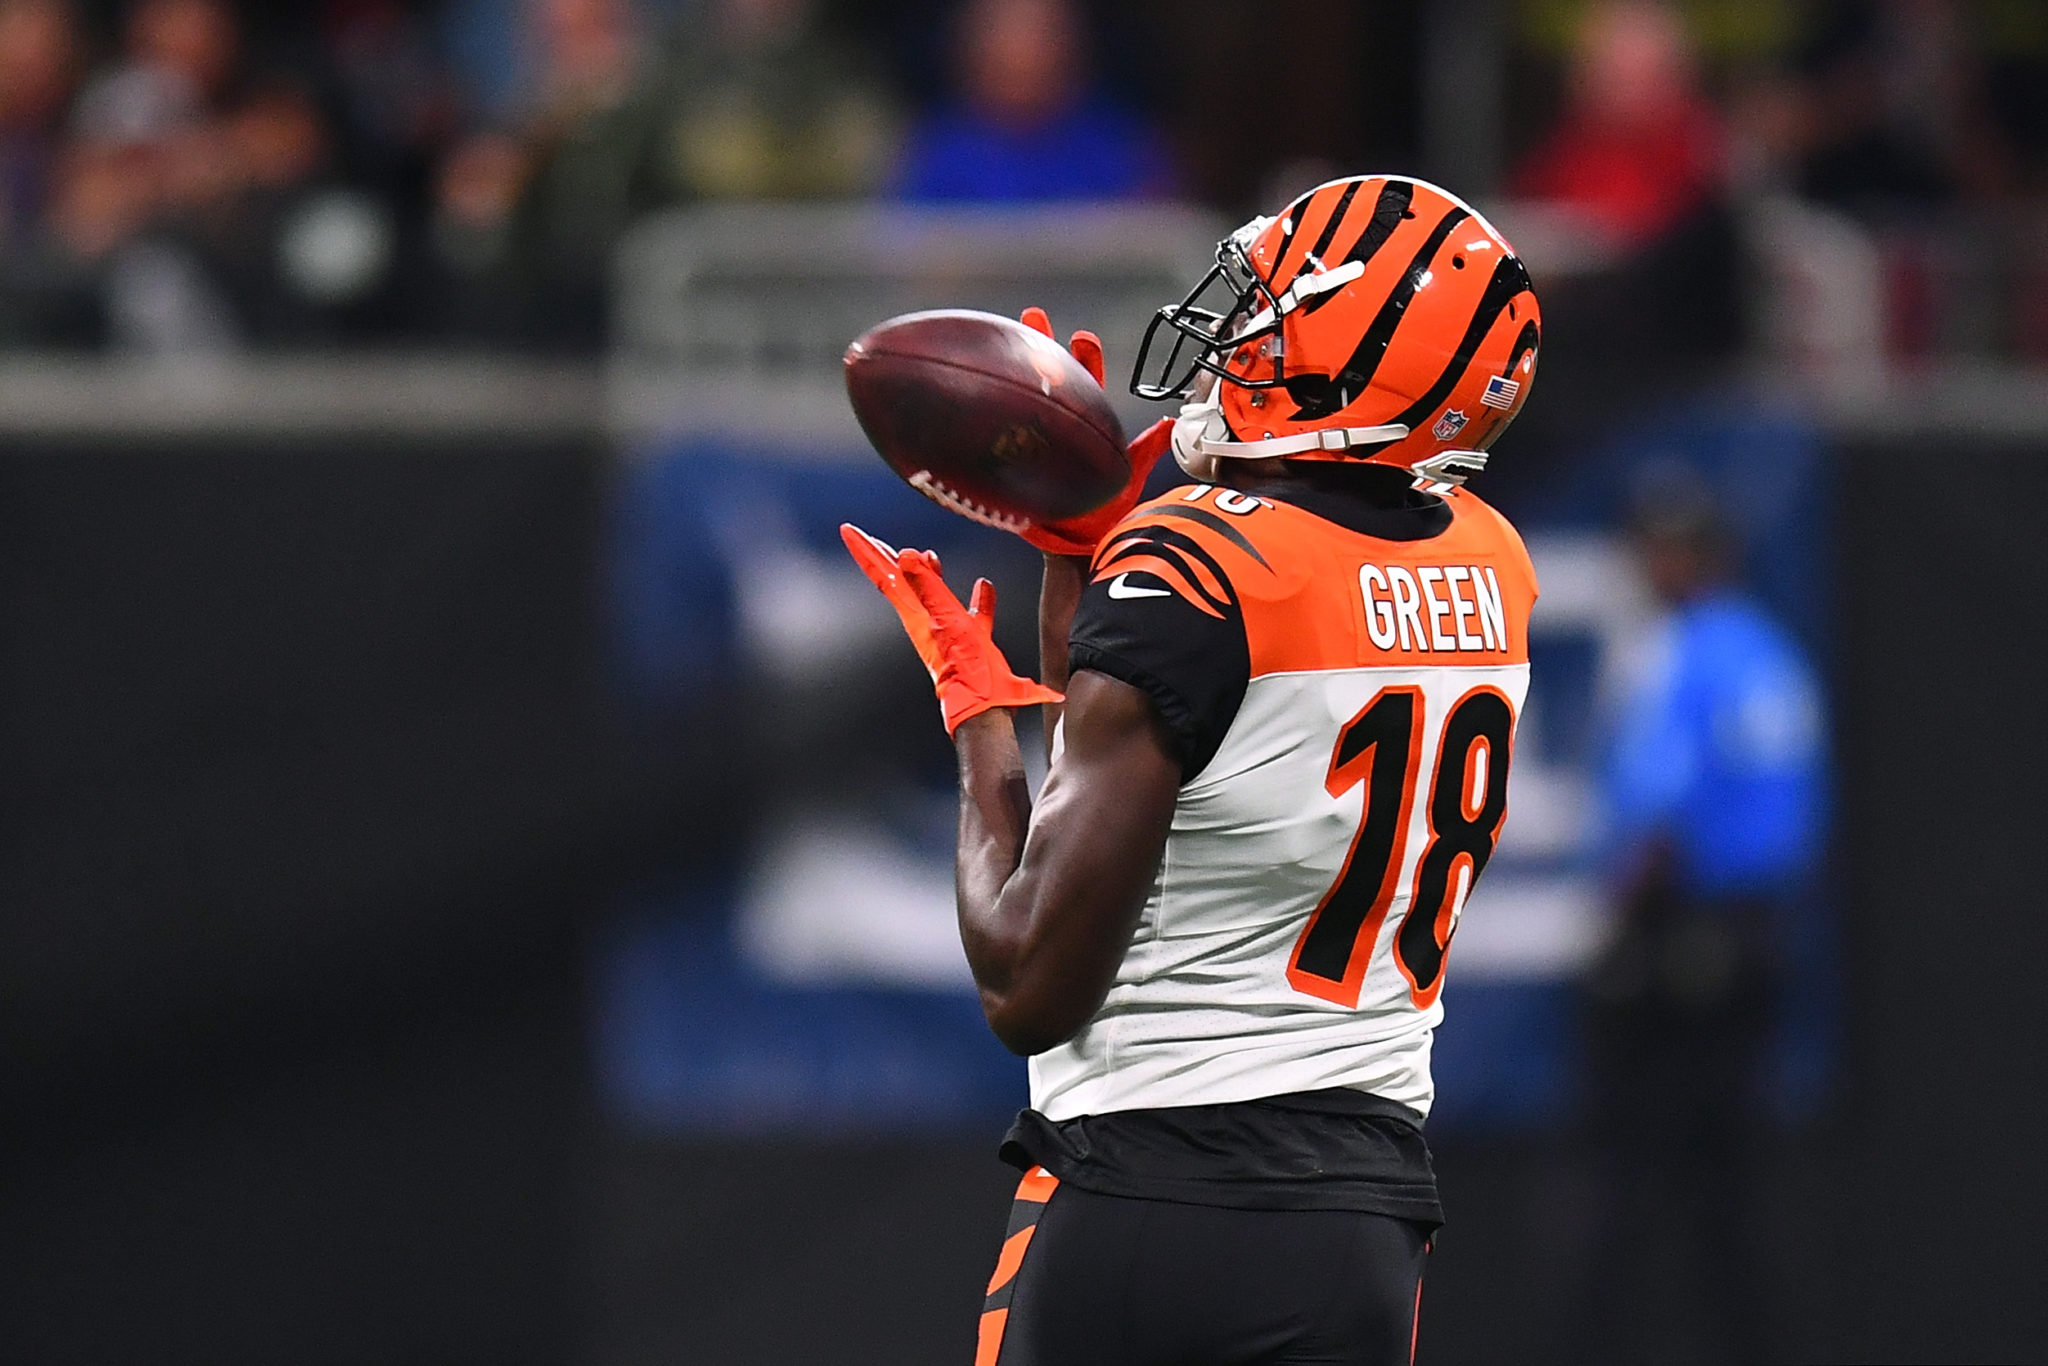 AJ Green leaving Bengals to join the Patriots